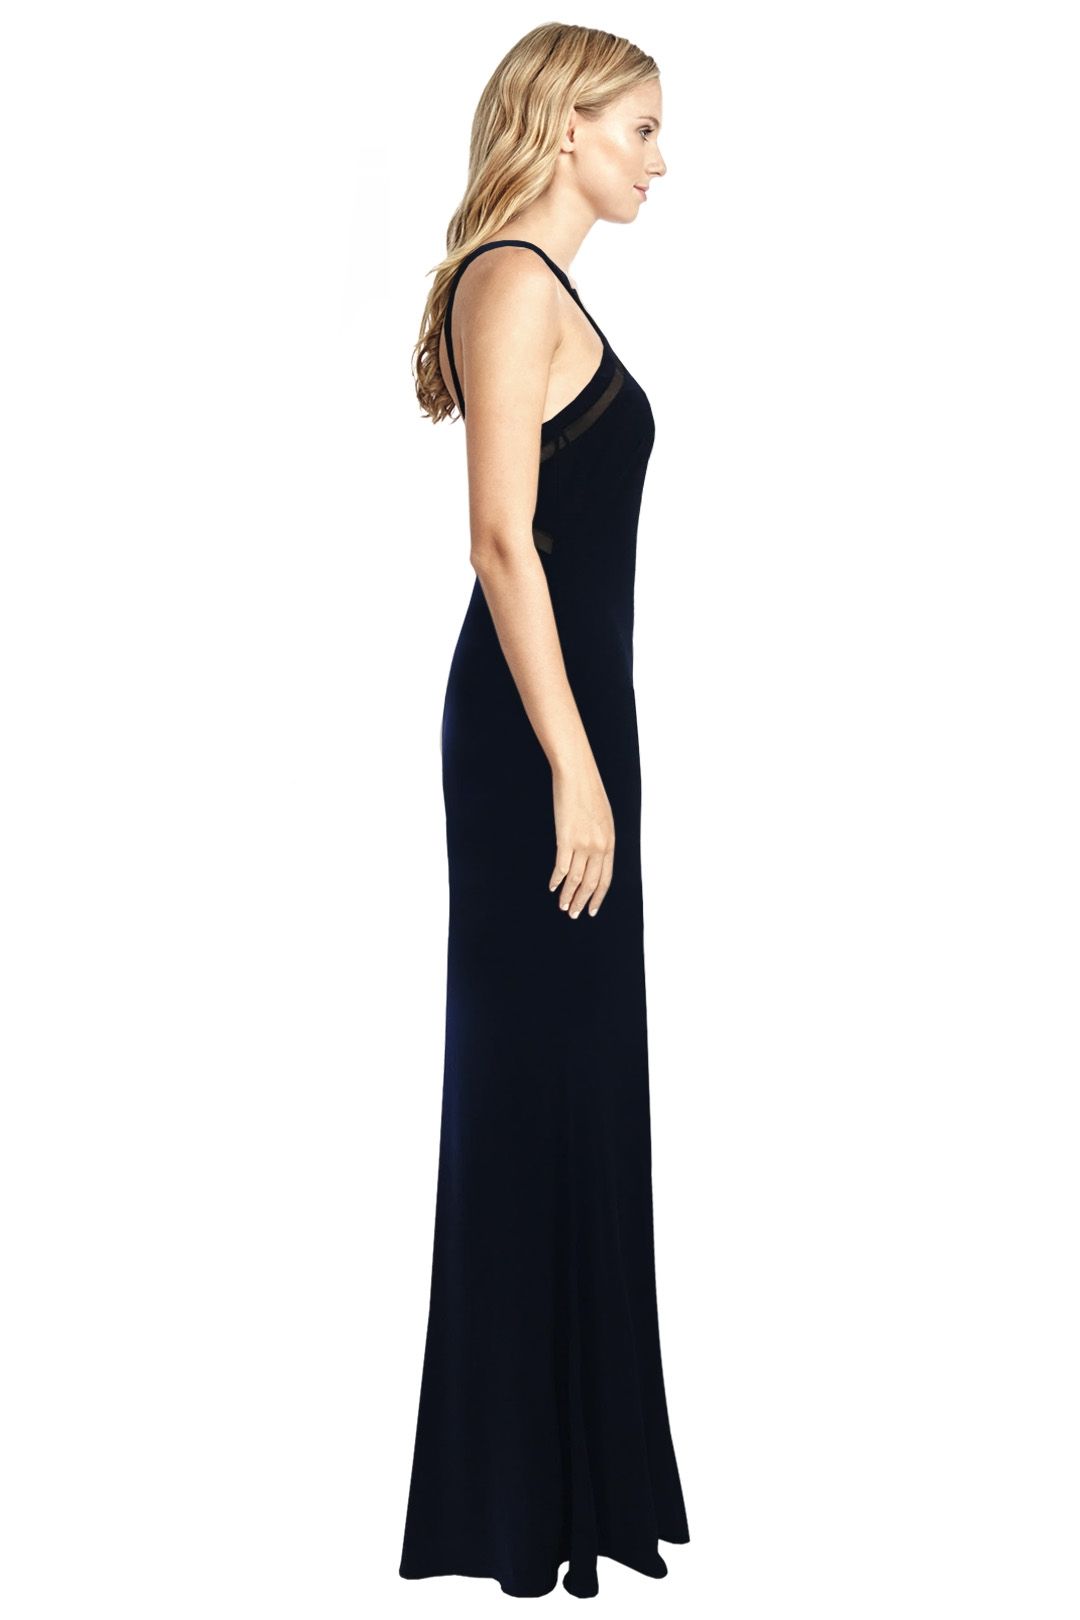 George - Athena Gown - Black - Side